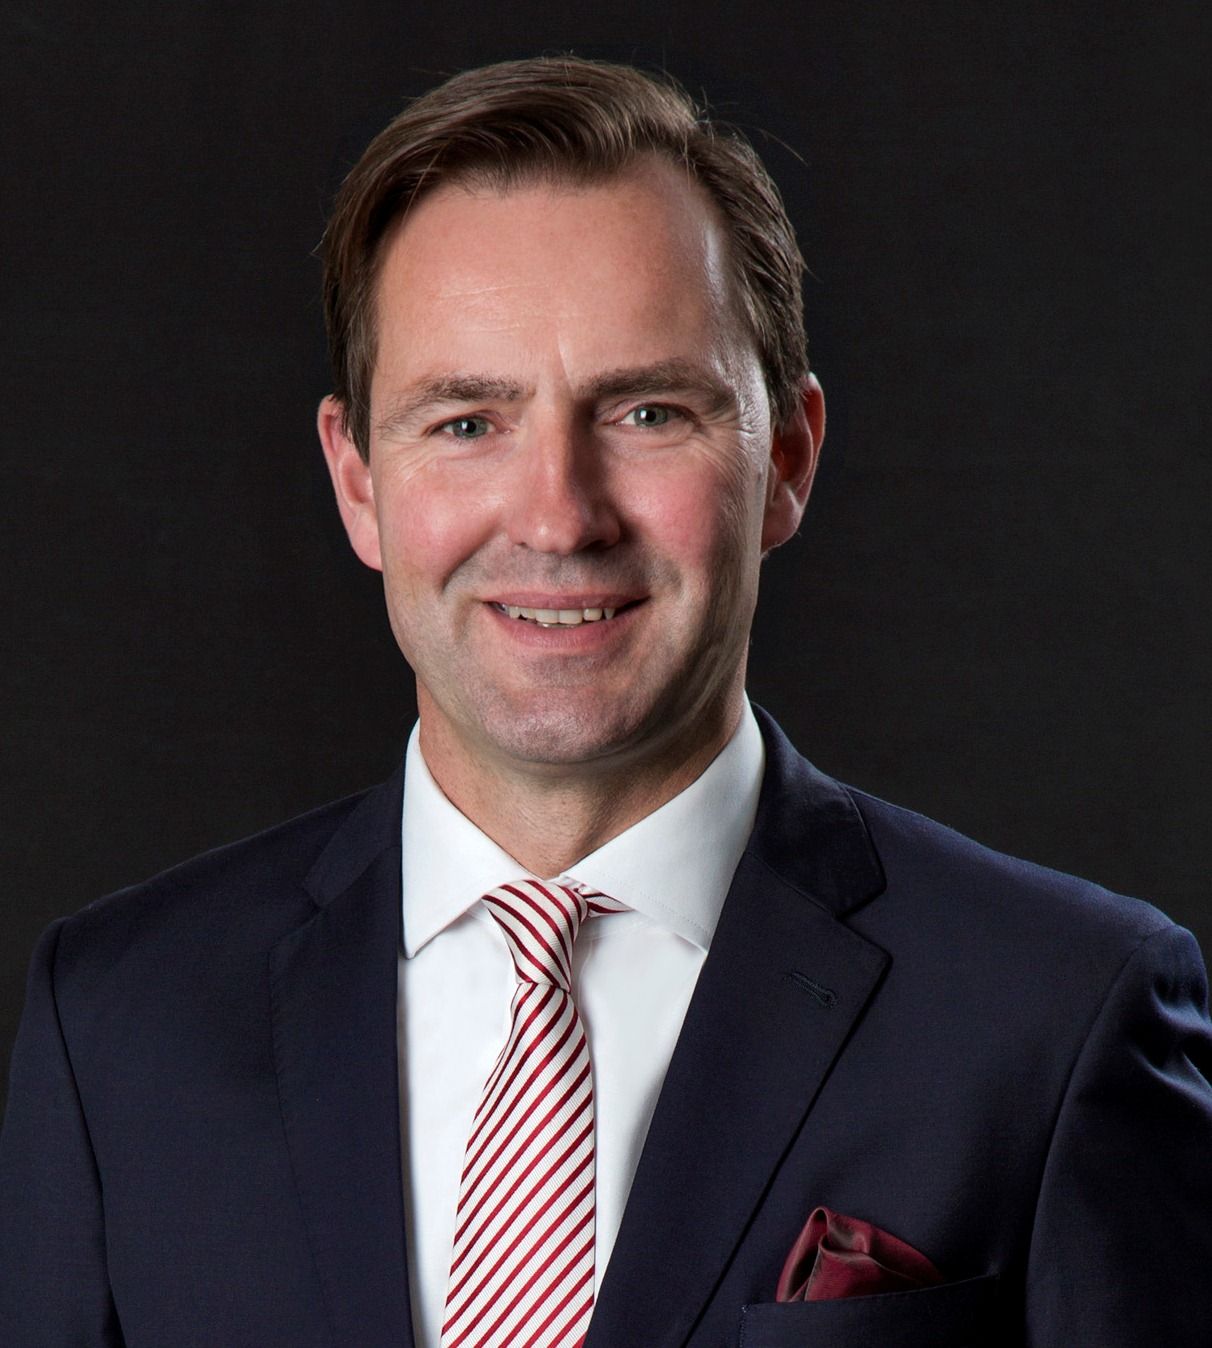 Thomas Schäfer takes over as Chairman of the Board at ŠKODA with immediate effect.